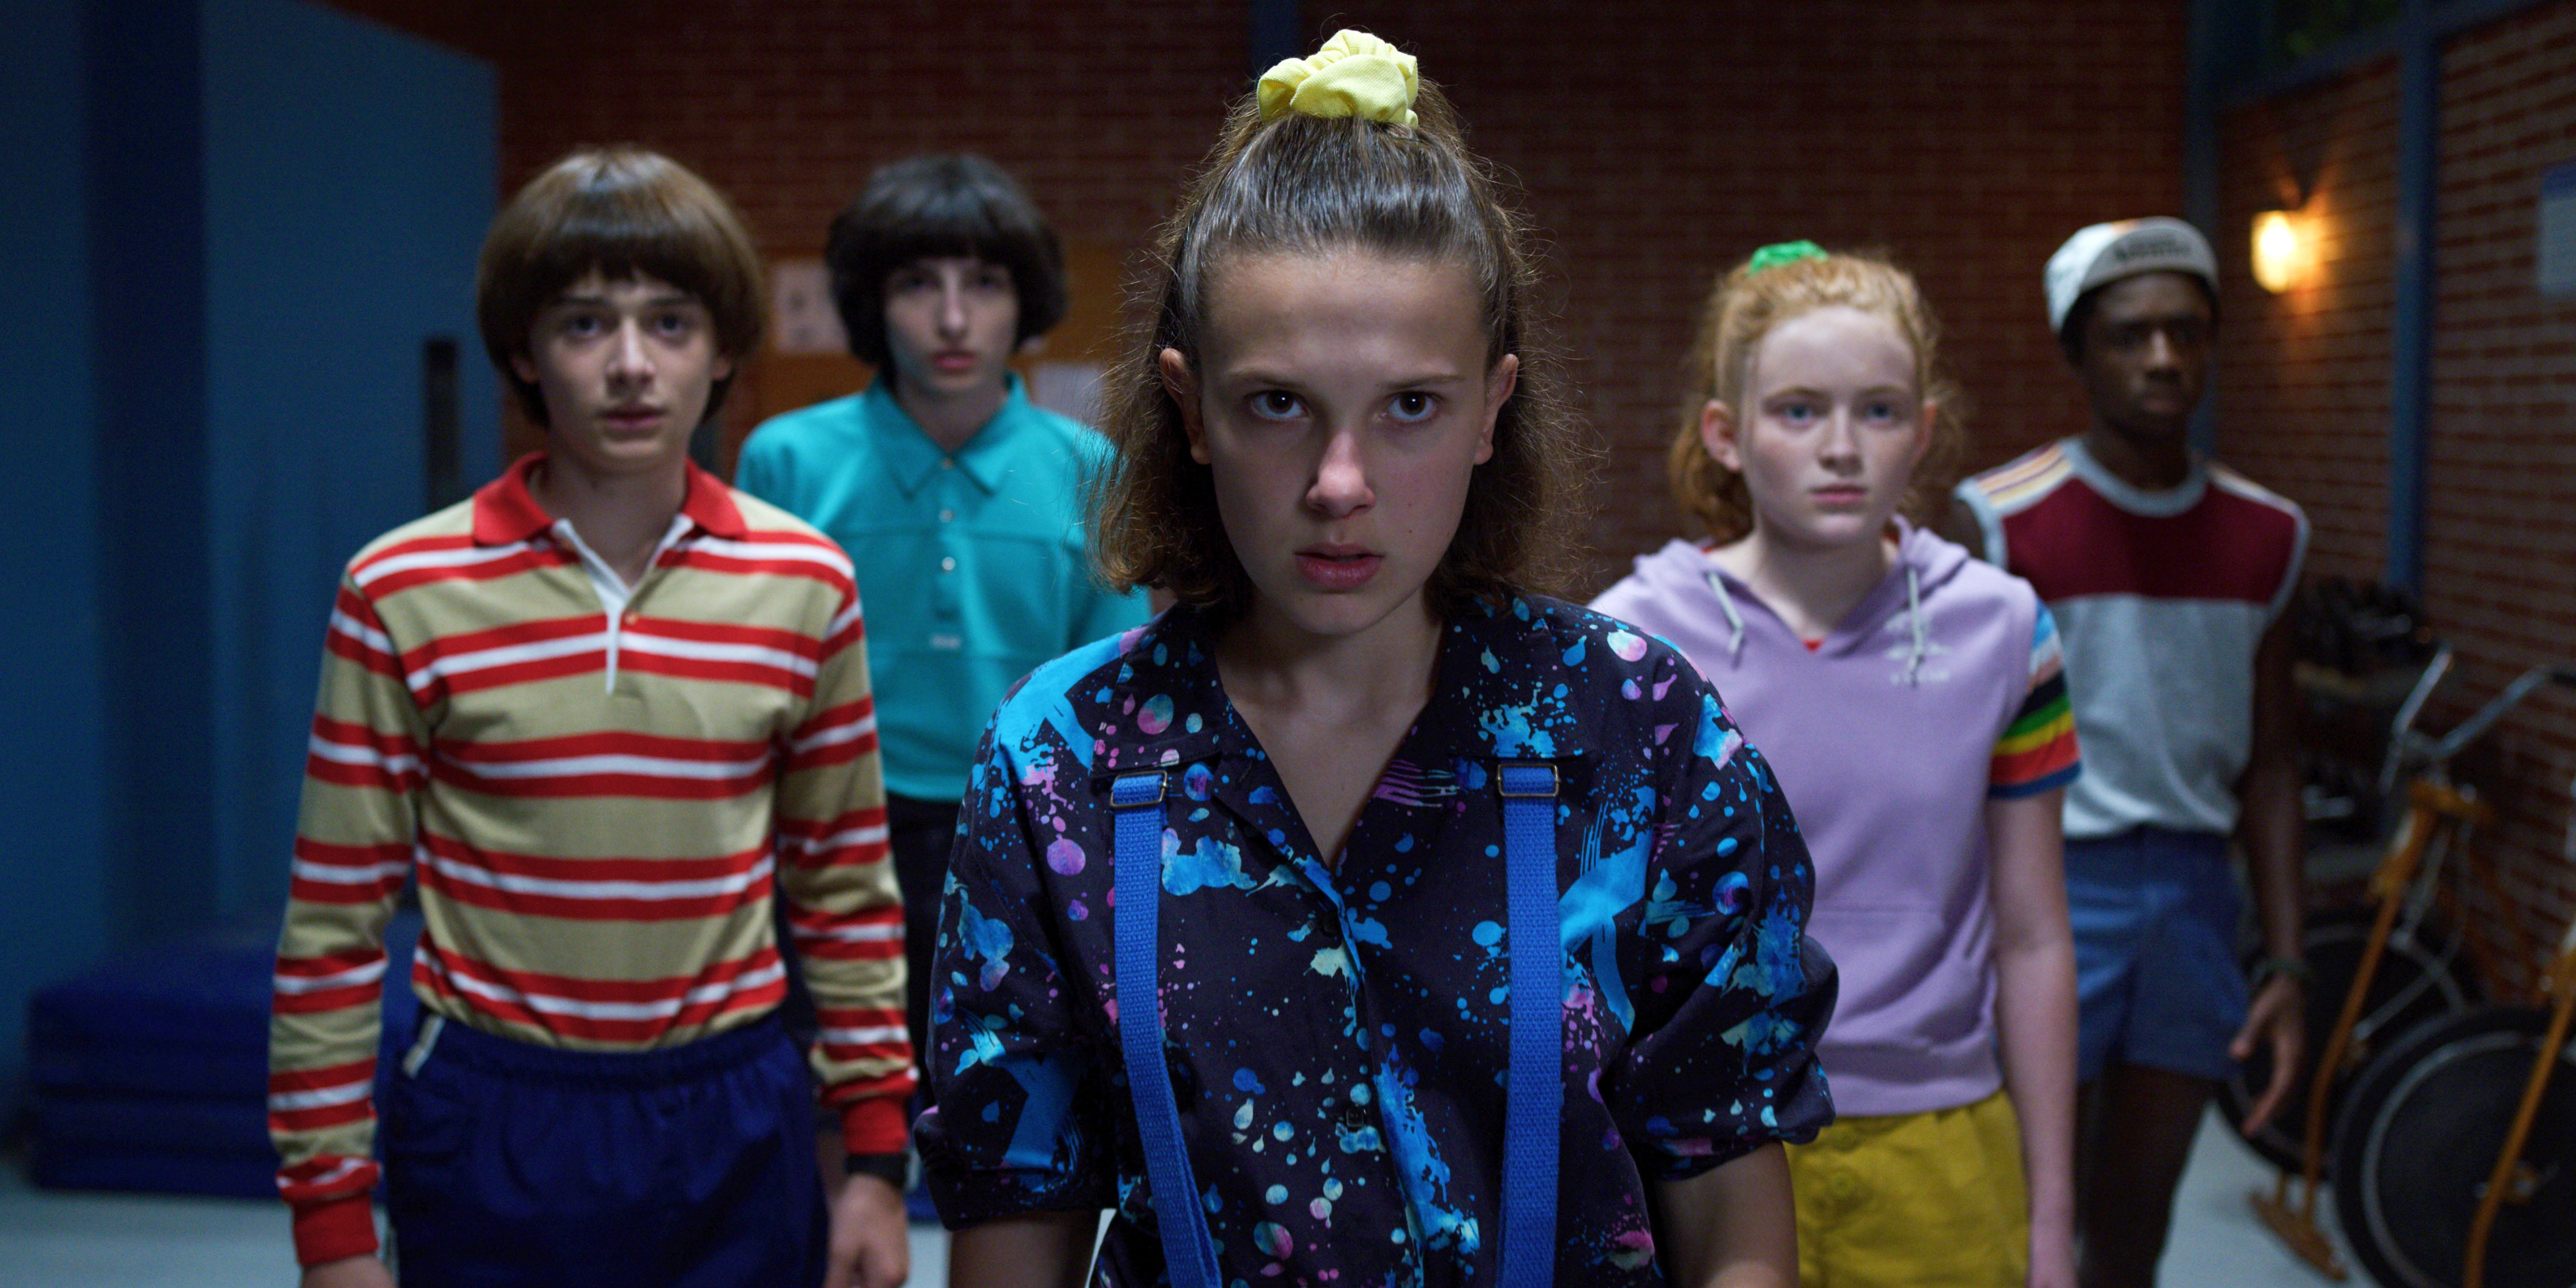 Stranger Things season 4 Volume 2 release date and time on Netflix